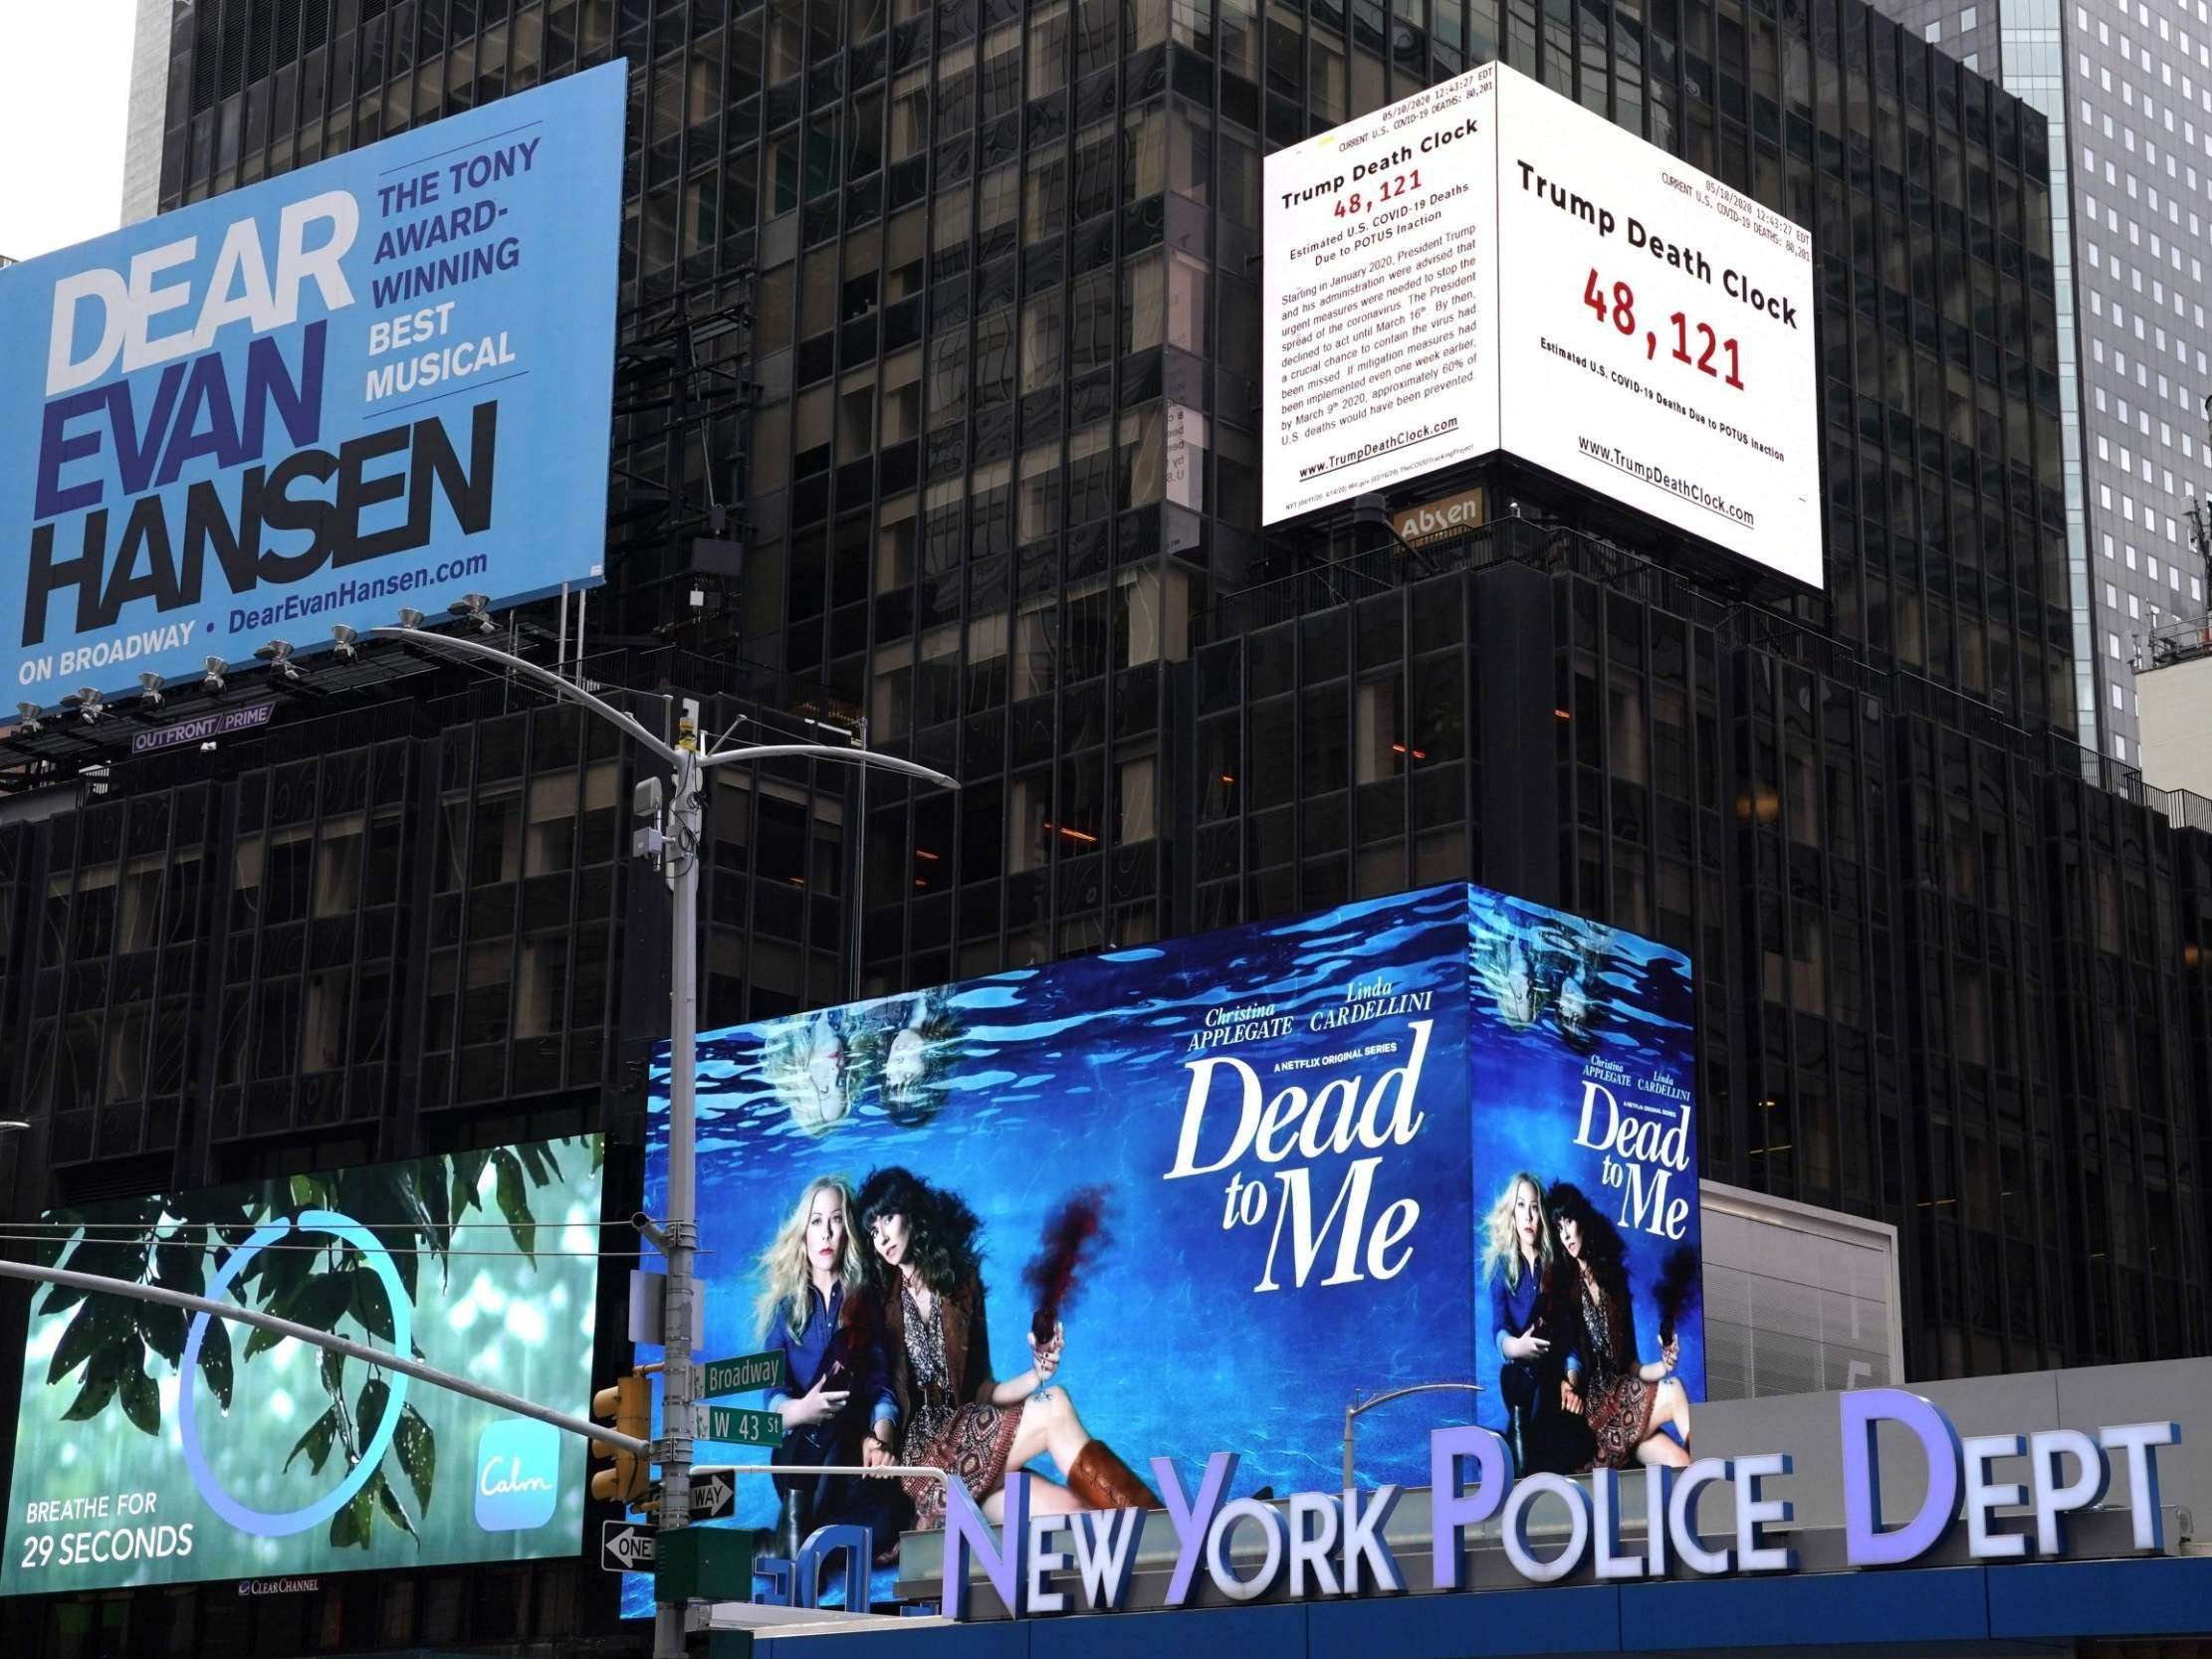 image for ‘Trump death clock’ in New York’s Times Square counts coronavirus fatalities blamed on president’s inaction